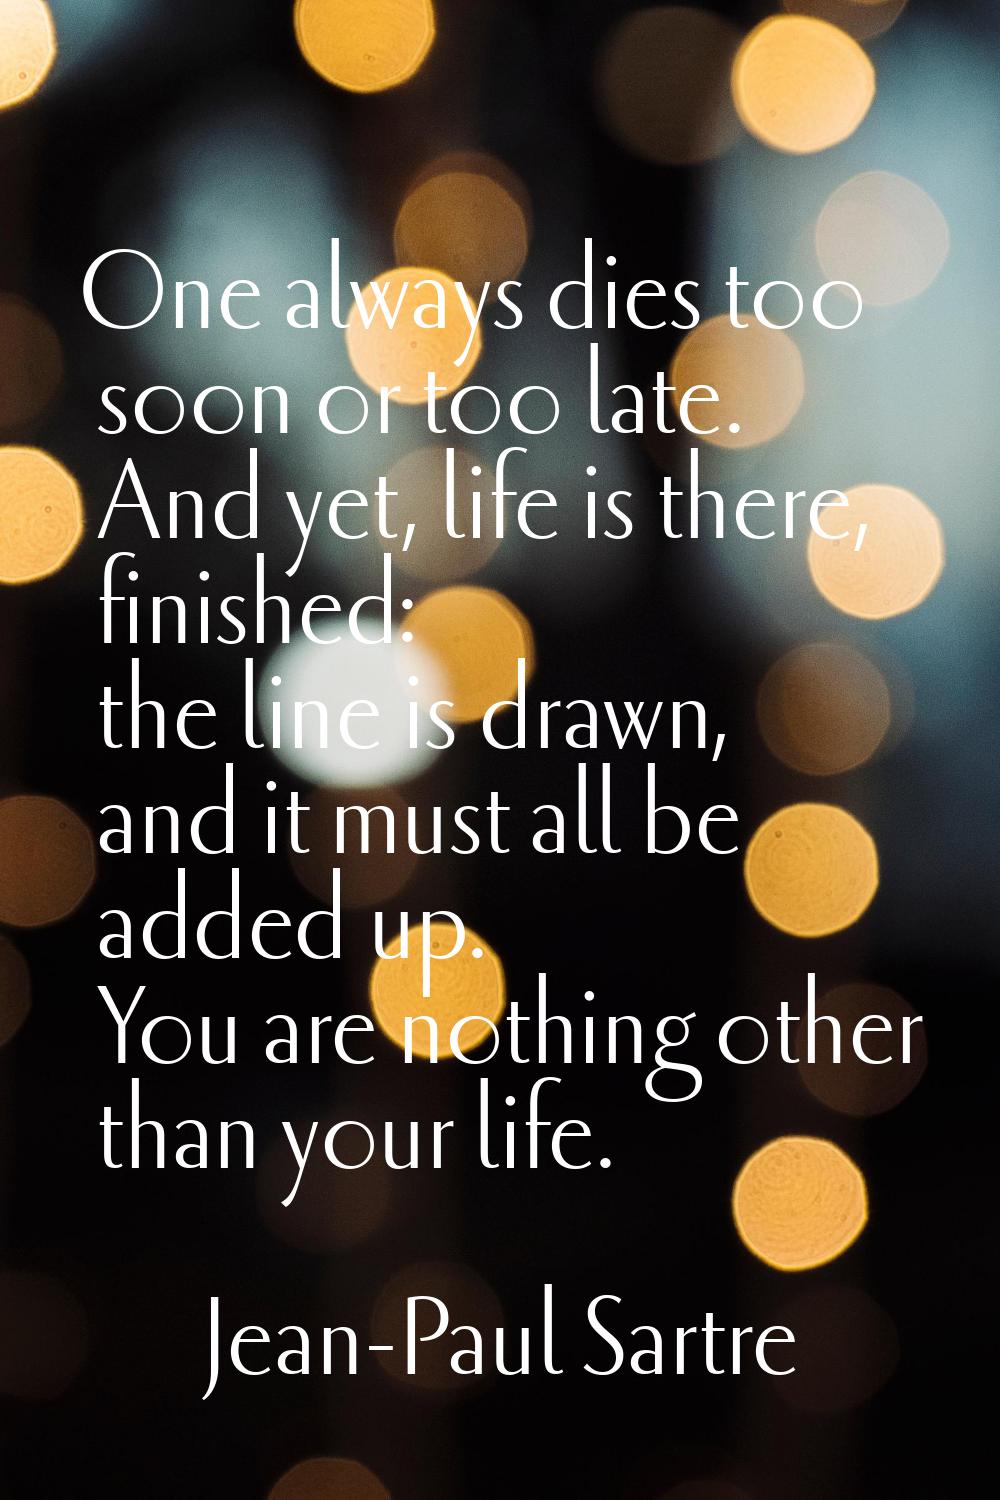 One always dies too soon or too late. And yet, life is there, finished: the line is drawn, and it m